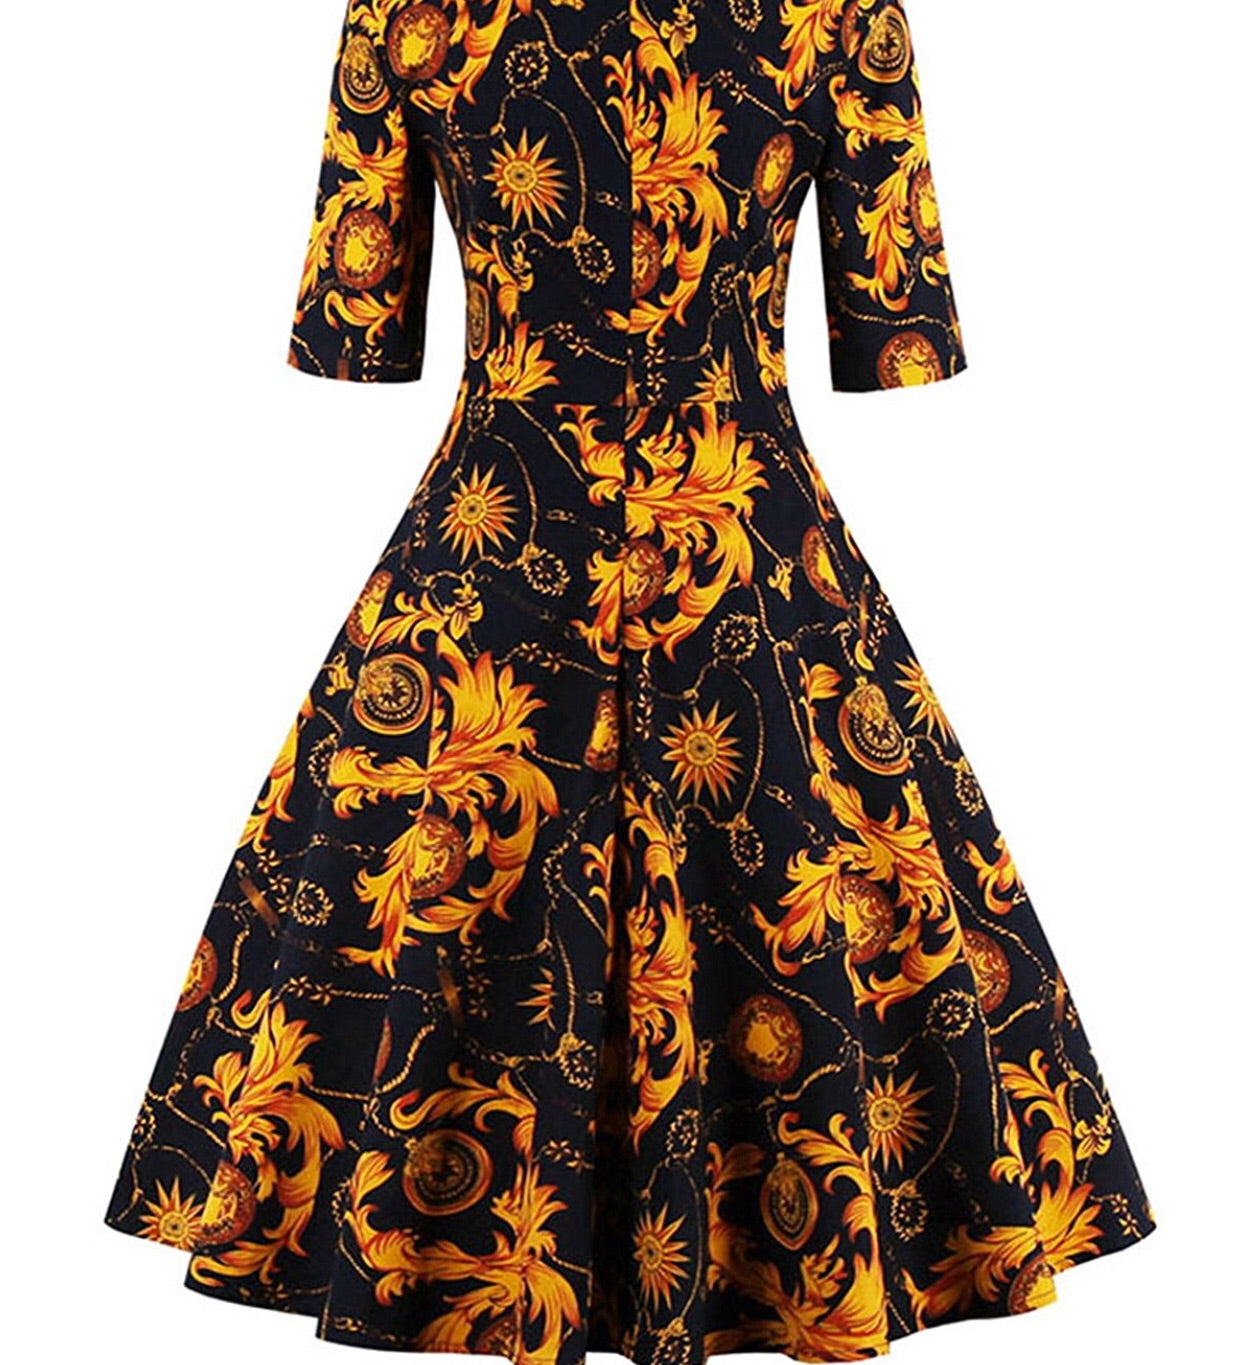 Rounded Neck Floral Swing Dress, Sizes Small - 4XLarge